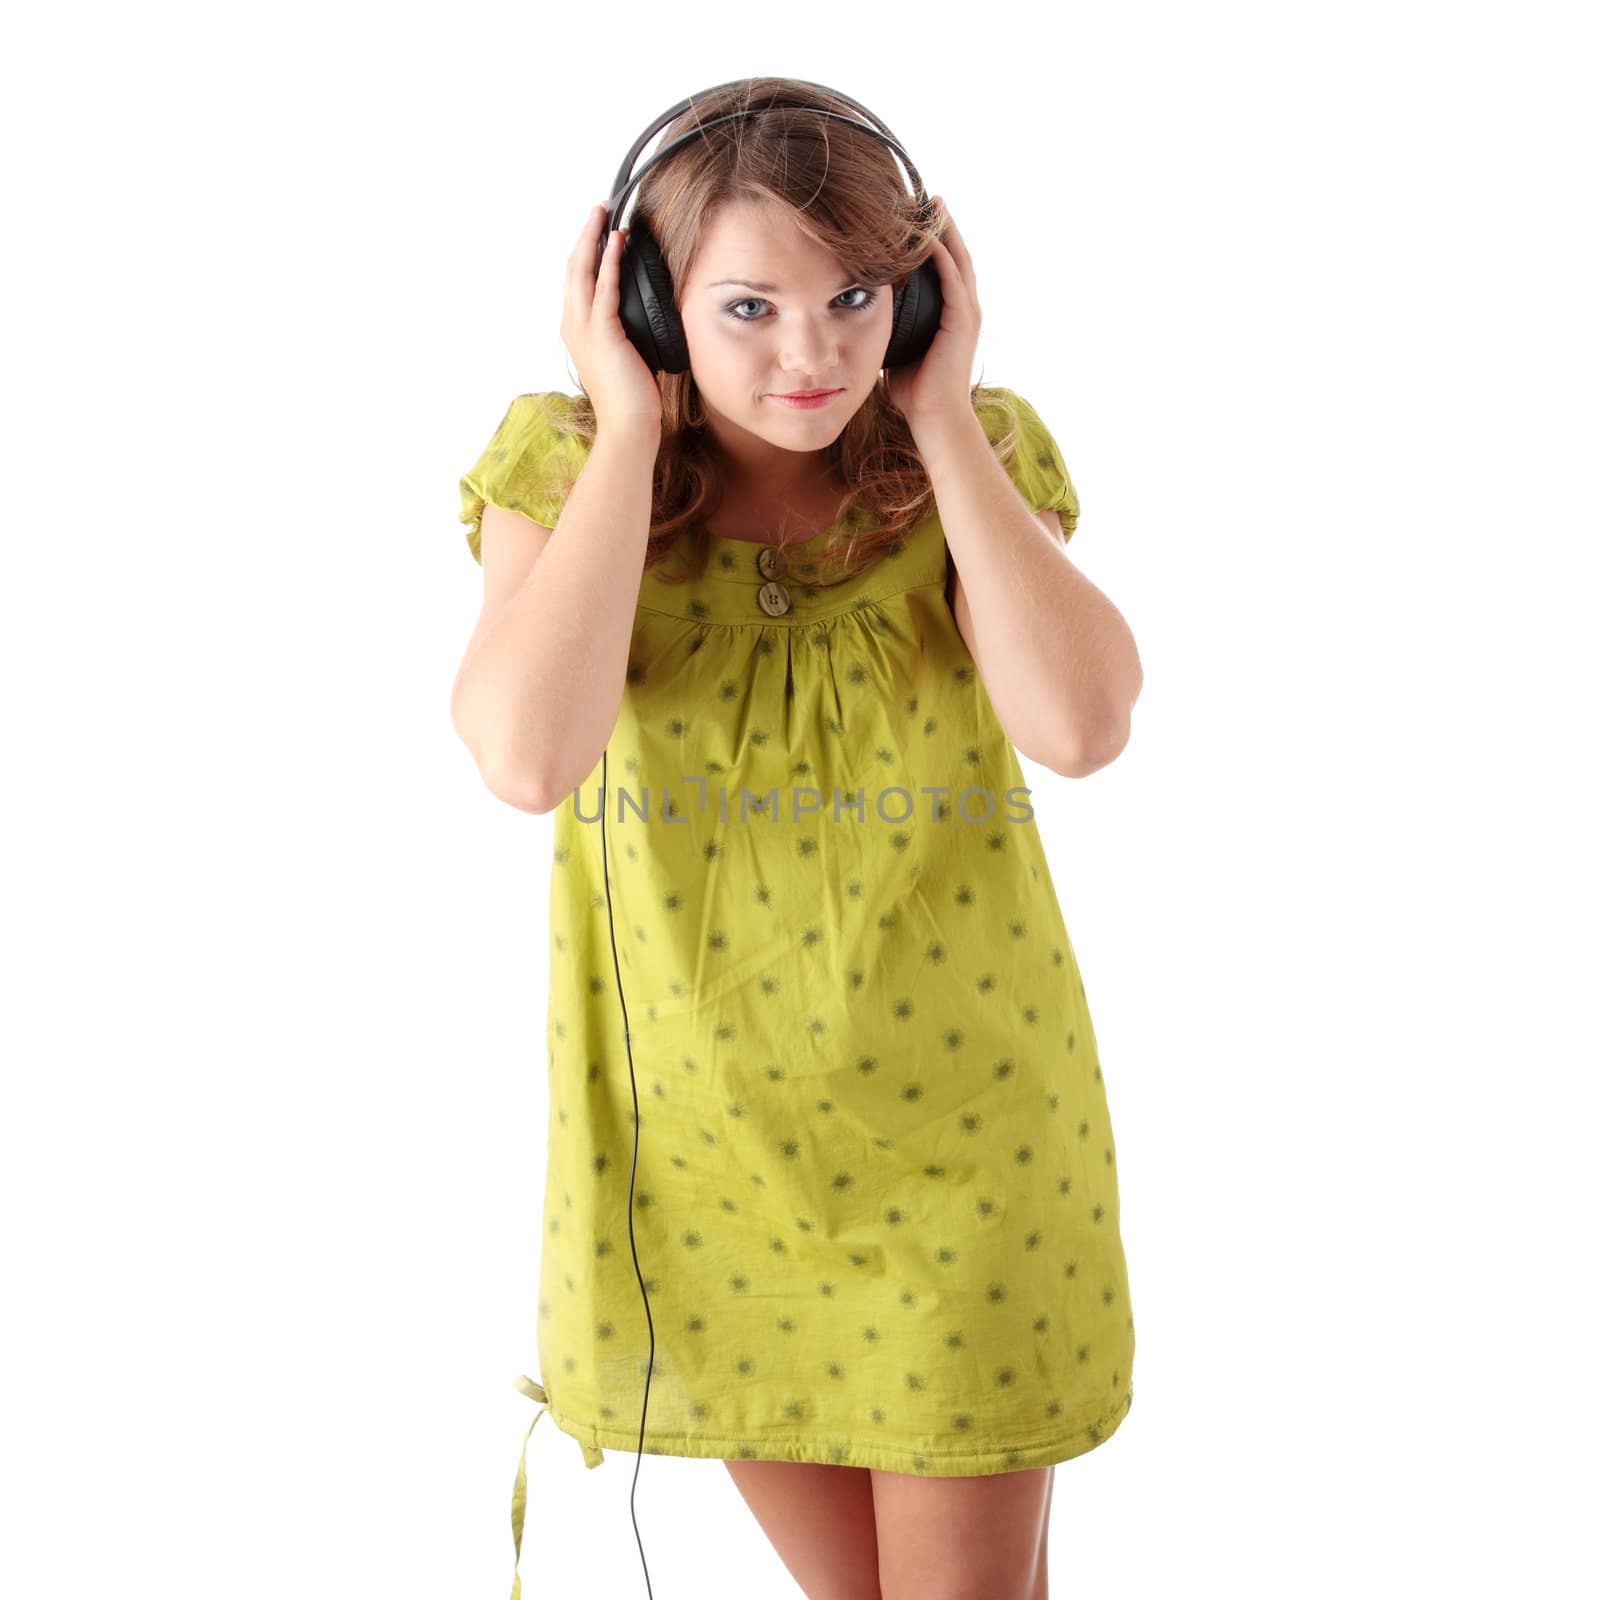 Beautiful teenage girl listening to music by BDS